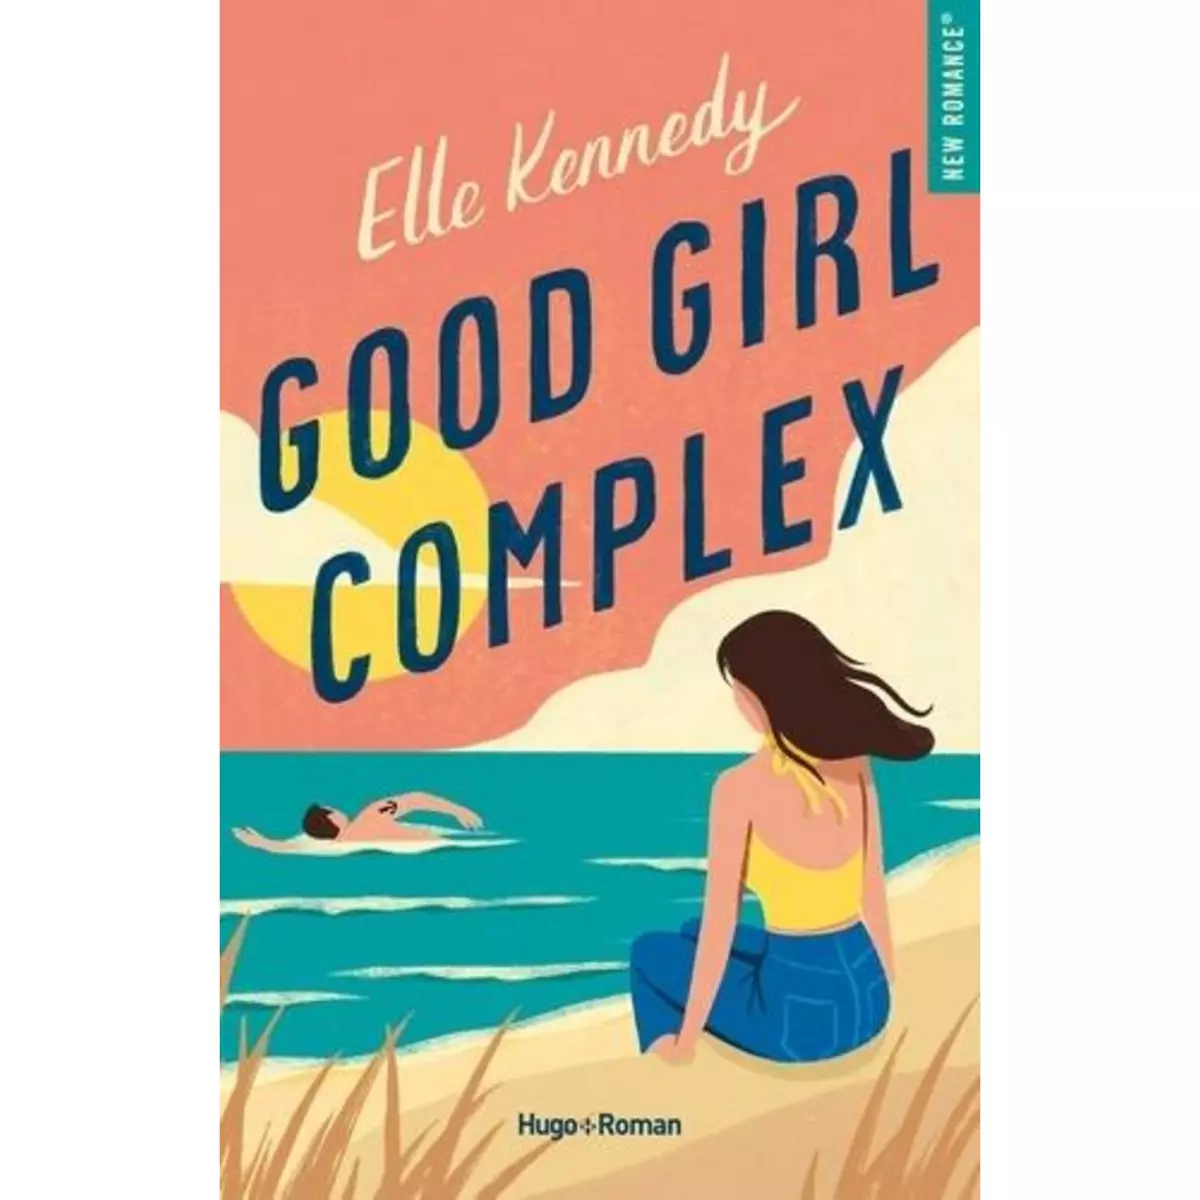  AVALON BAY TOME 1 : GOOD GIRL COMPLEX, Kennedy Elle